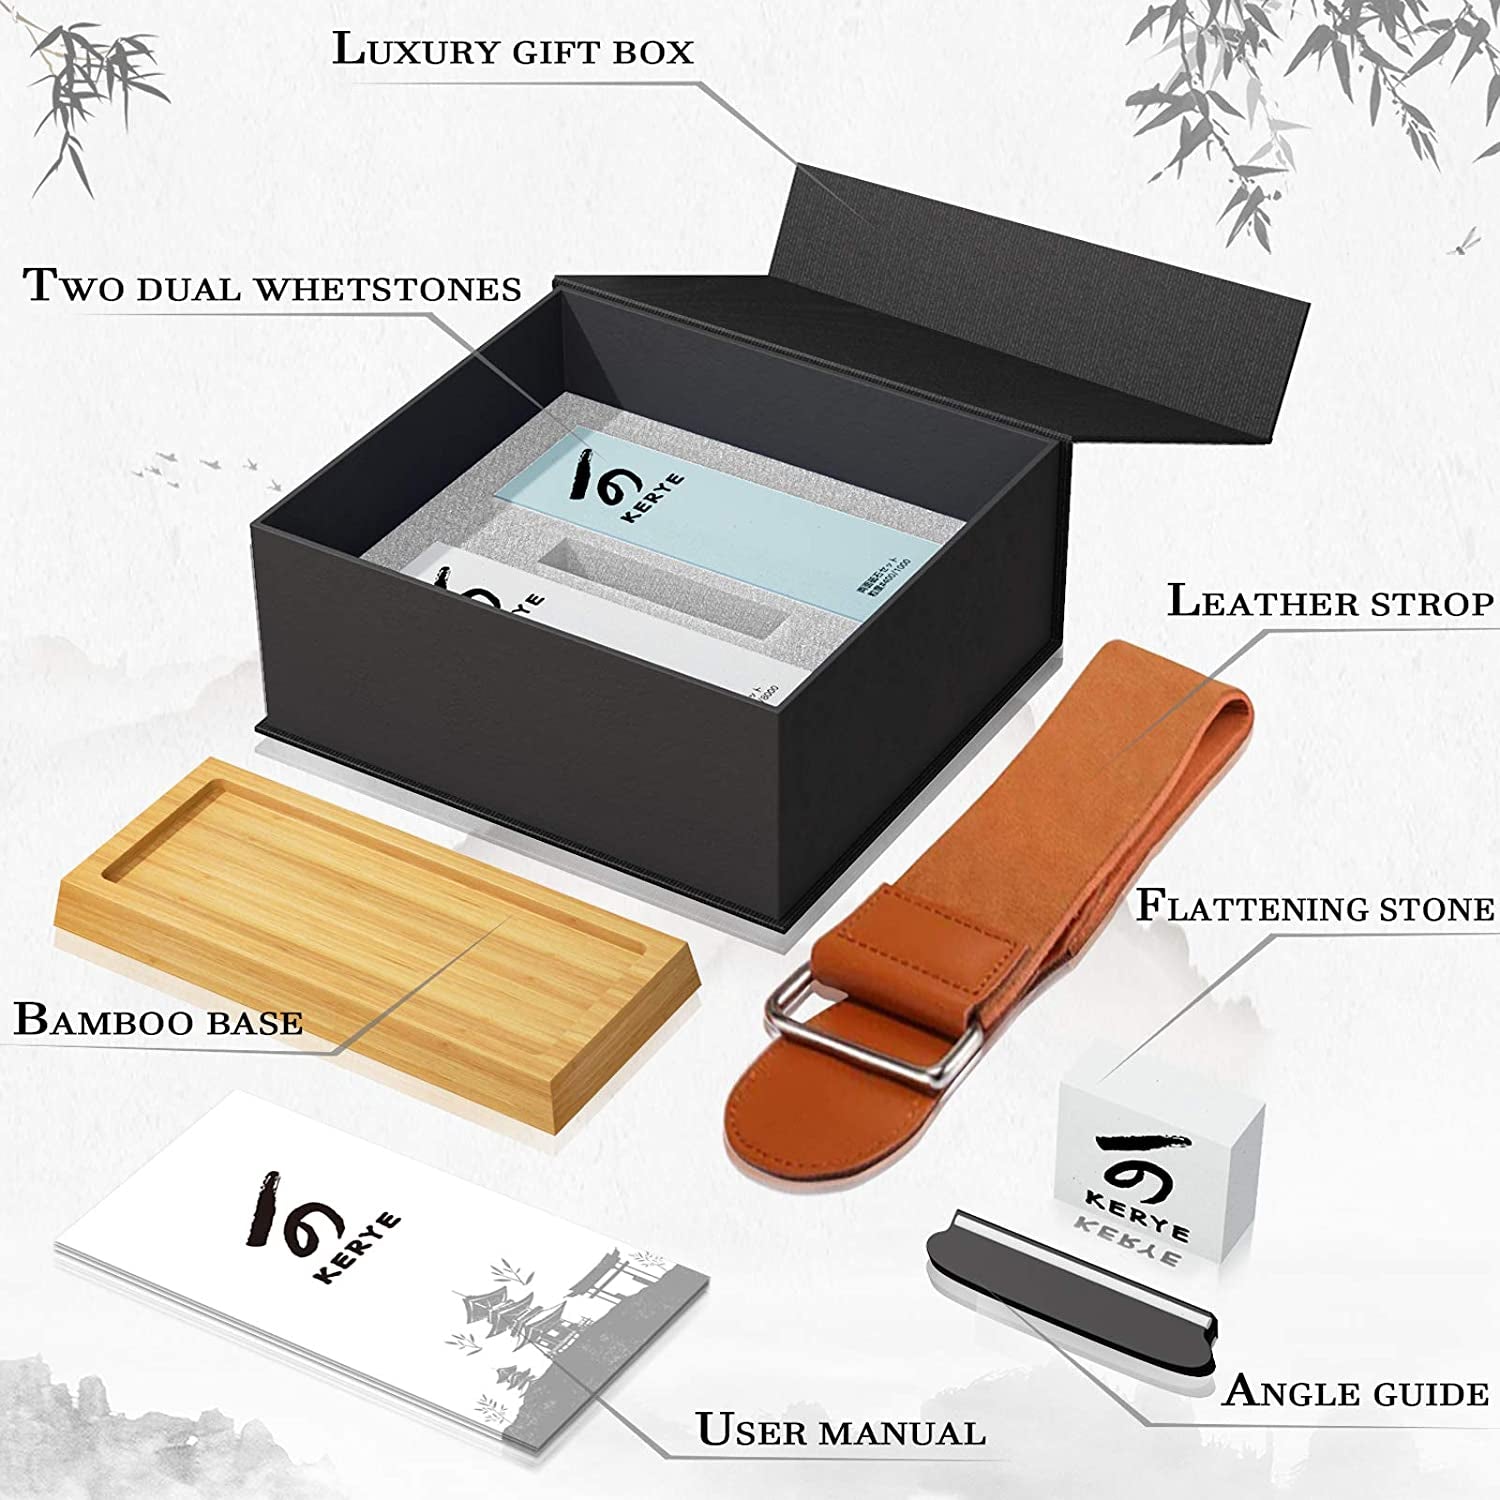 Sharpening Stone : Japanese Deluxe Multiform Waterstone : 1000 Grit -  Sundries - Etching and Intaglio - Printmaking - Color